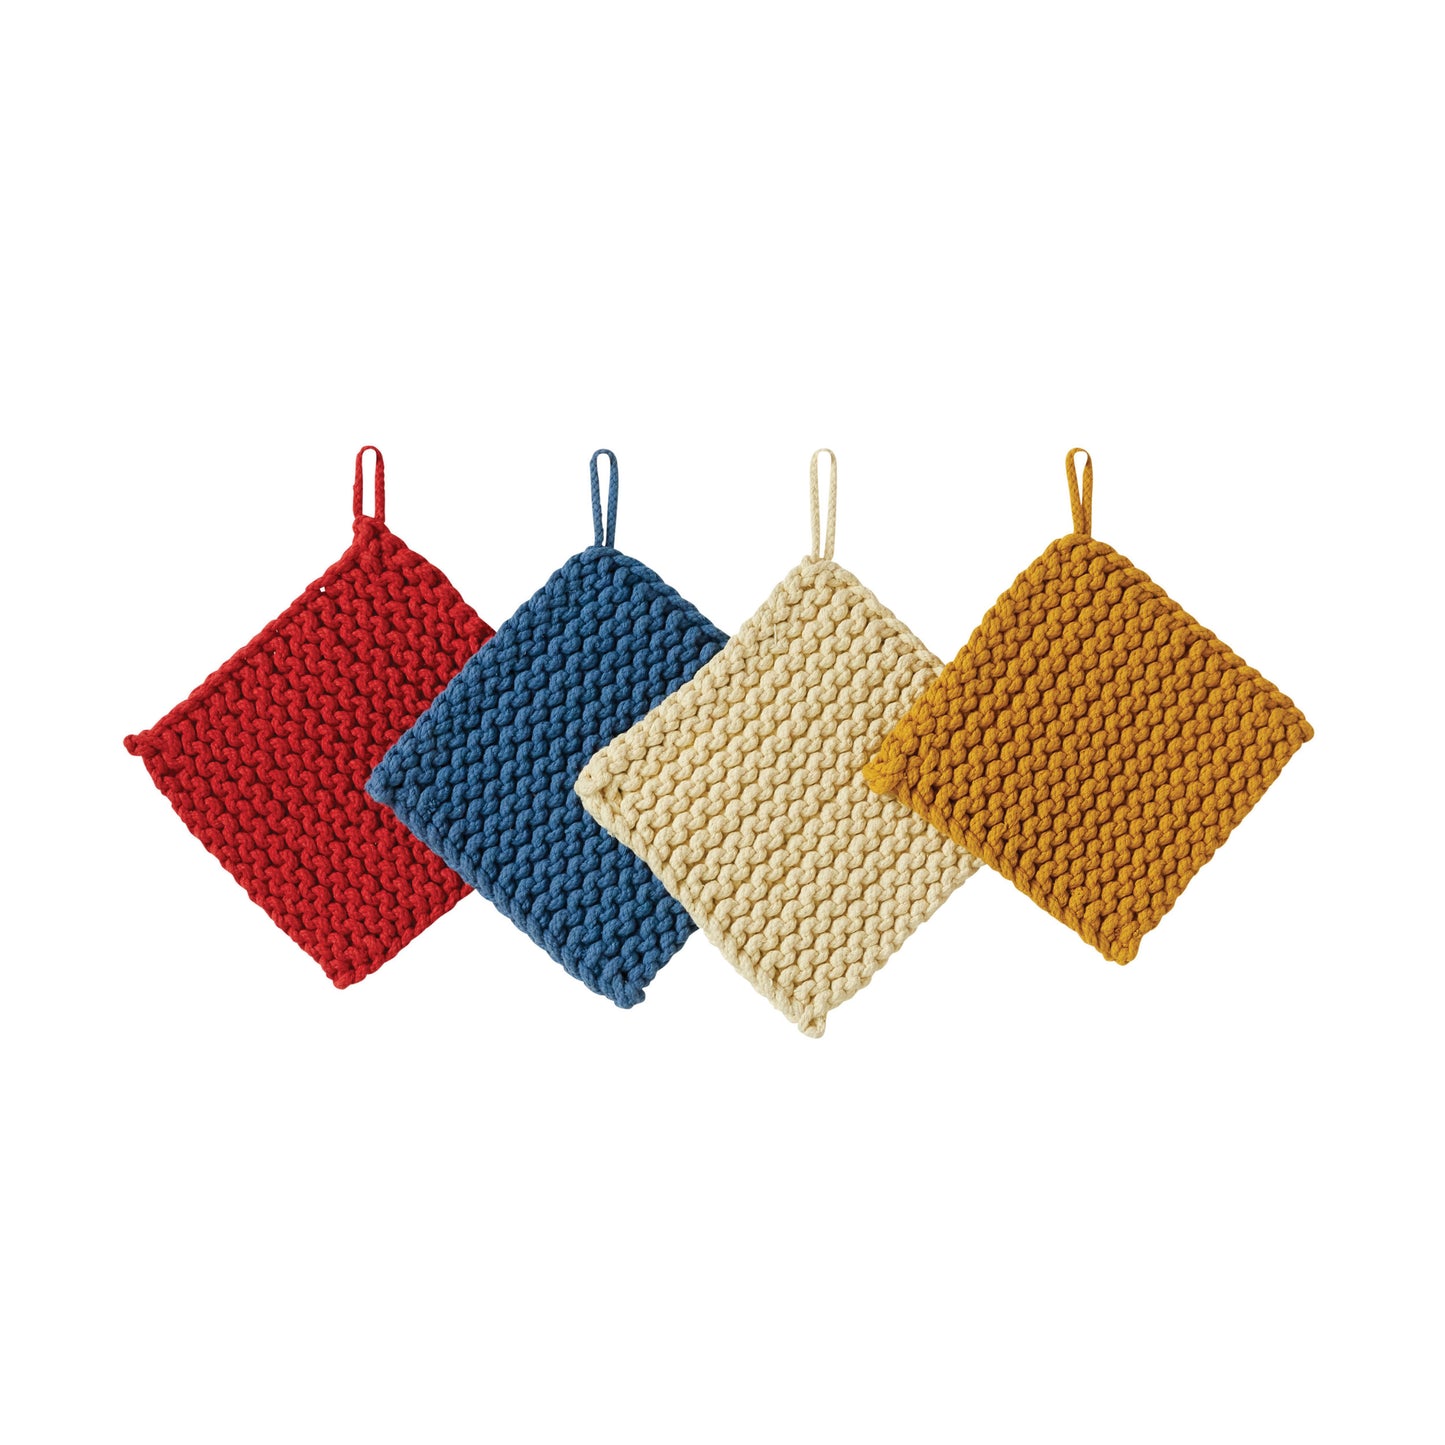 Square Cotton Crocheted Pot Holder Asst Primary Colors (Sold Individually)